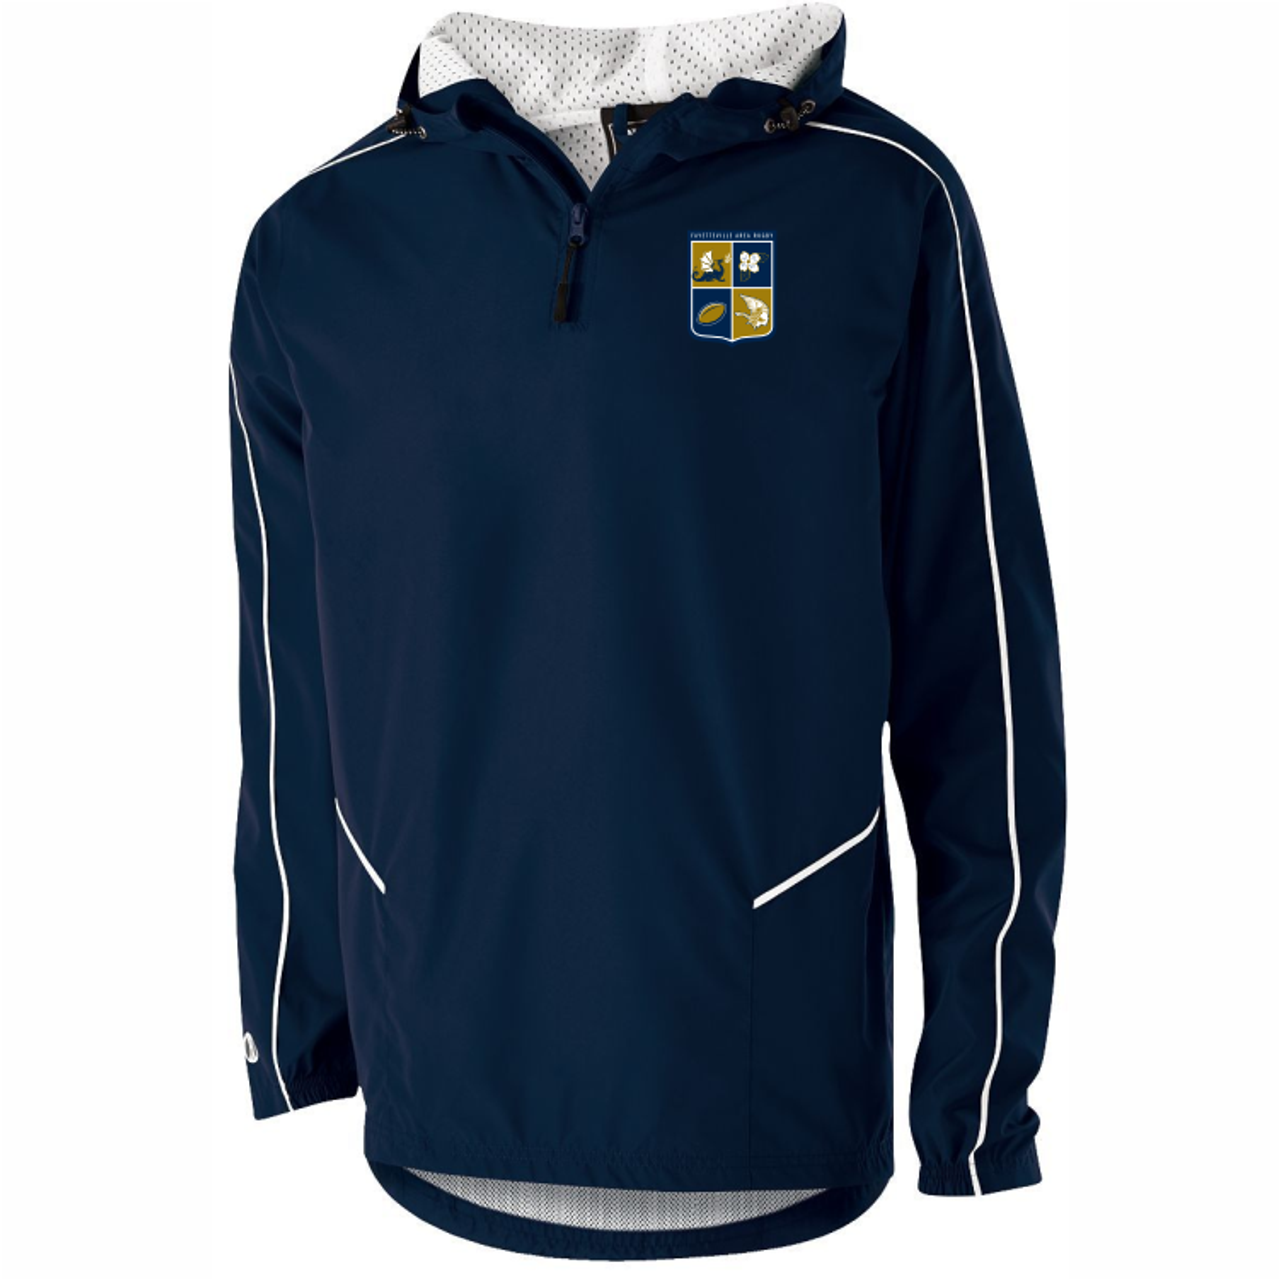 Fayetteville Area Rugby Pullover Hooded Jacket, Navy